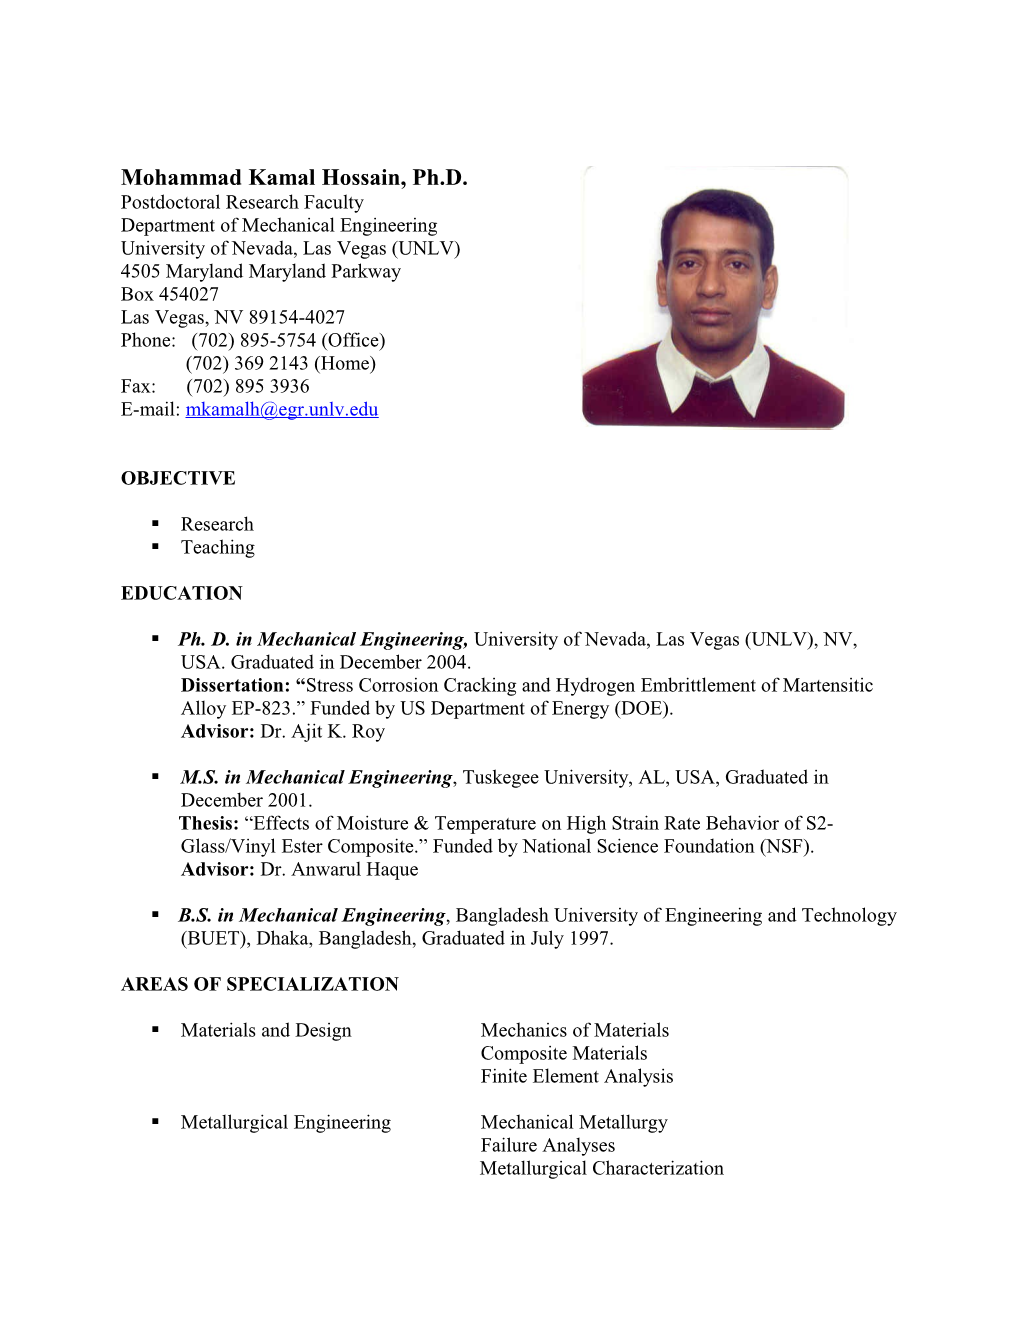 Mohammad Kamal Hossain, Ph.D. Postdoctoral Research Faculty